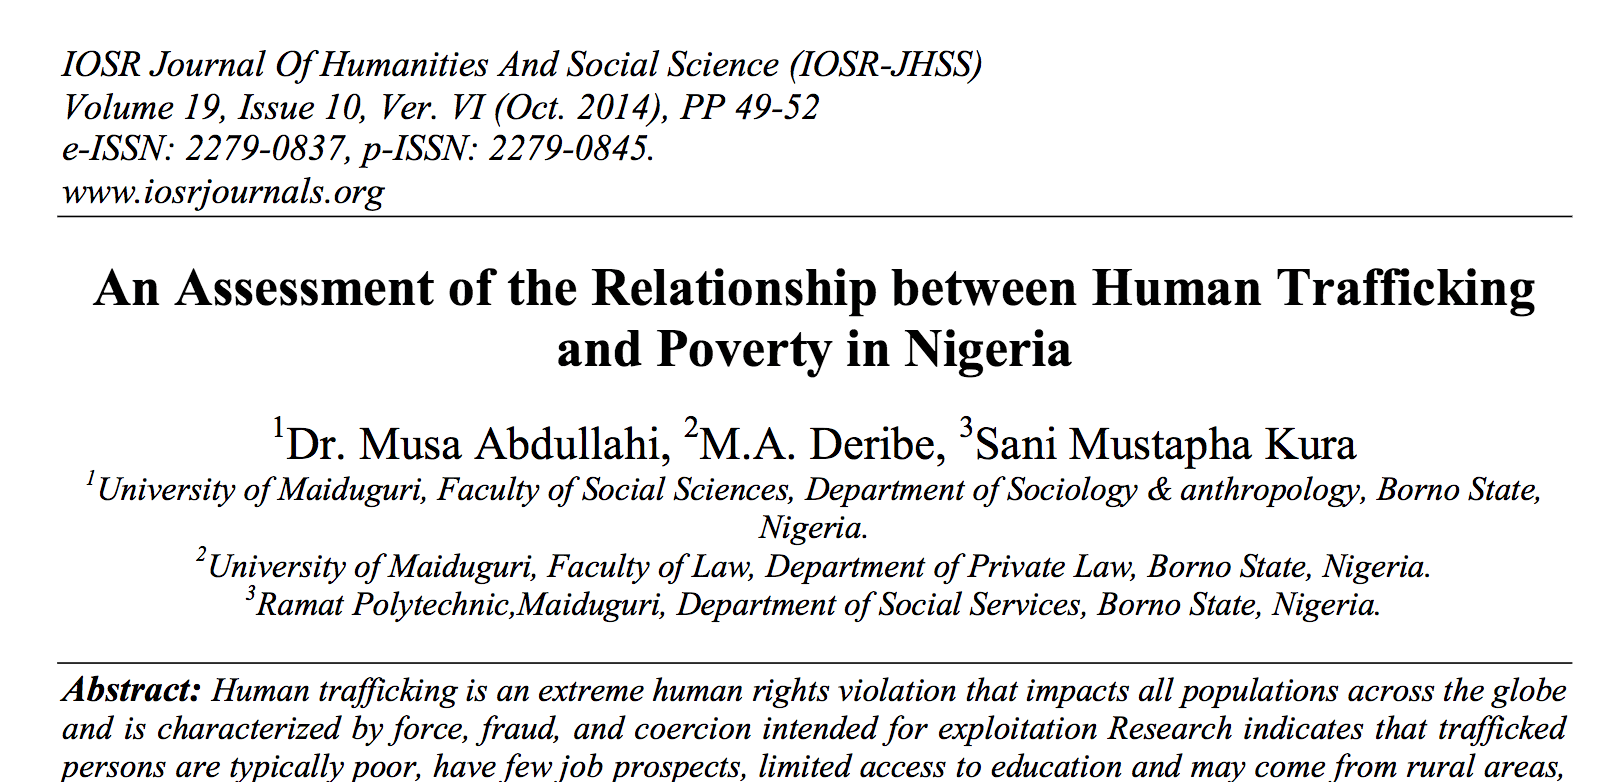 An Assessment of the Relationship between Human Trafficking and Poverty in Nigeria